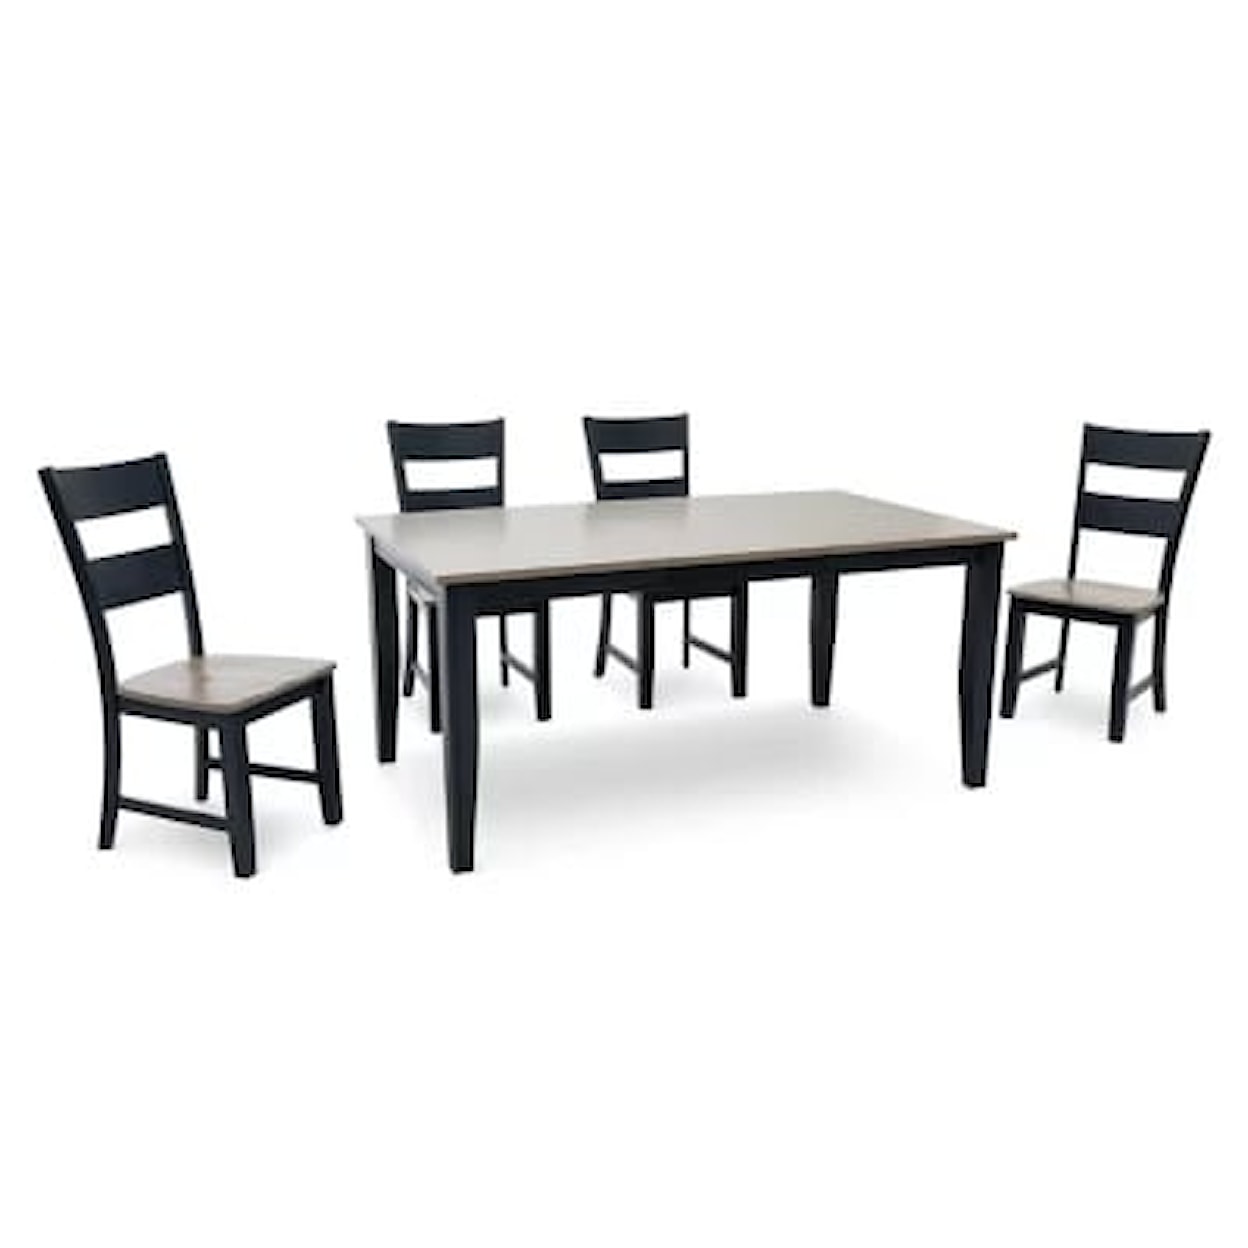 HH Barry Standard Height Table & 4 Chairs